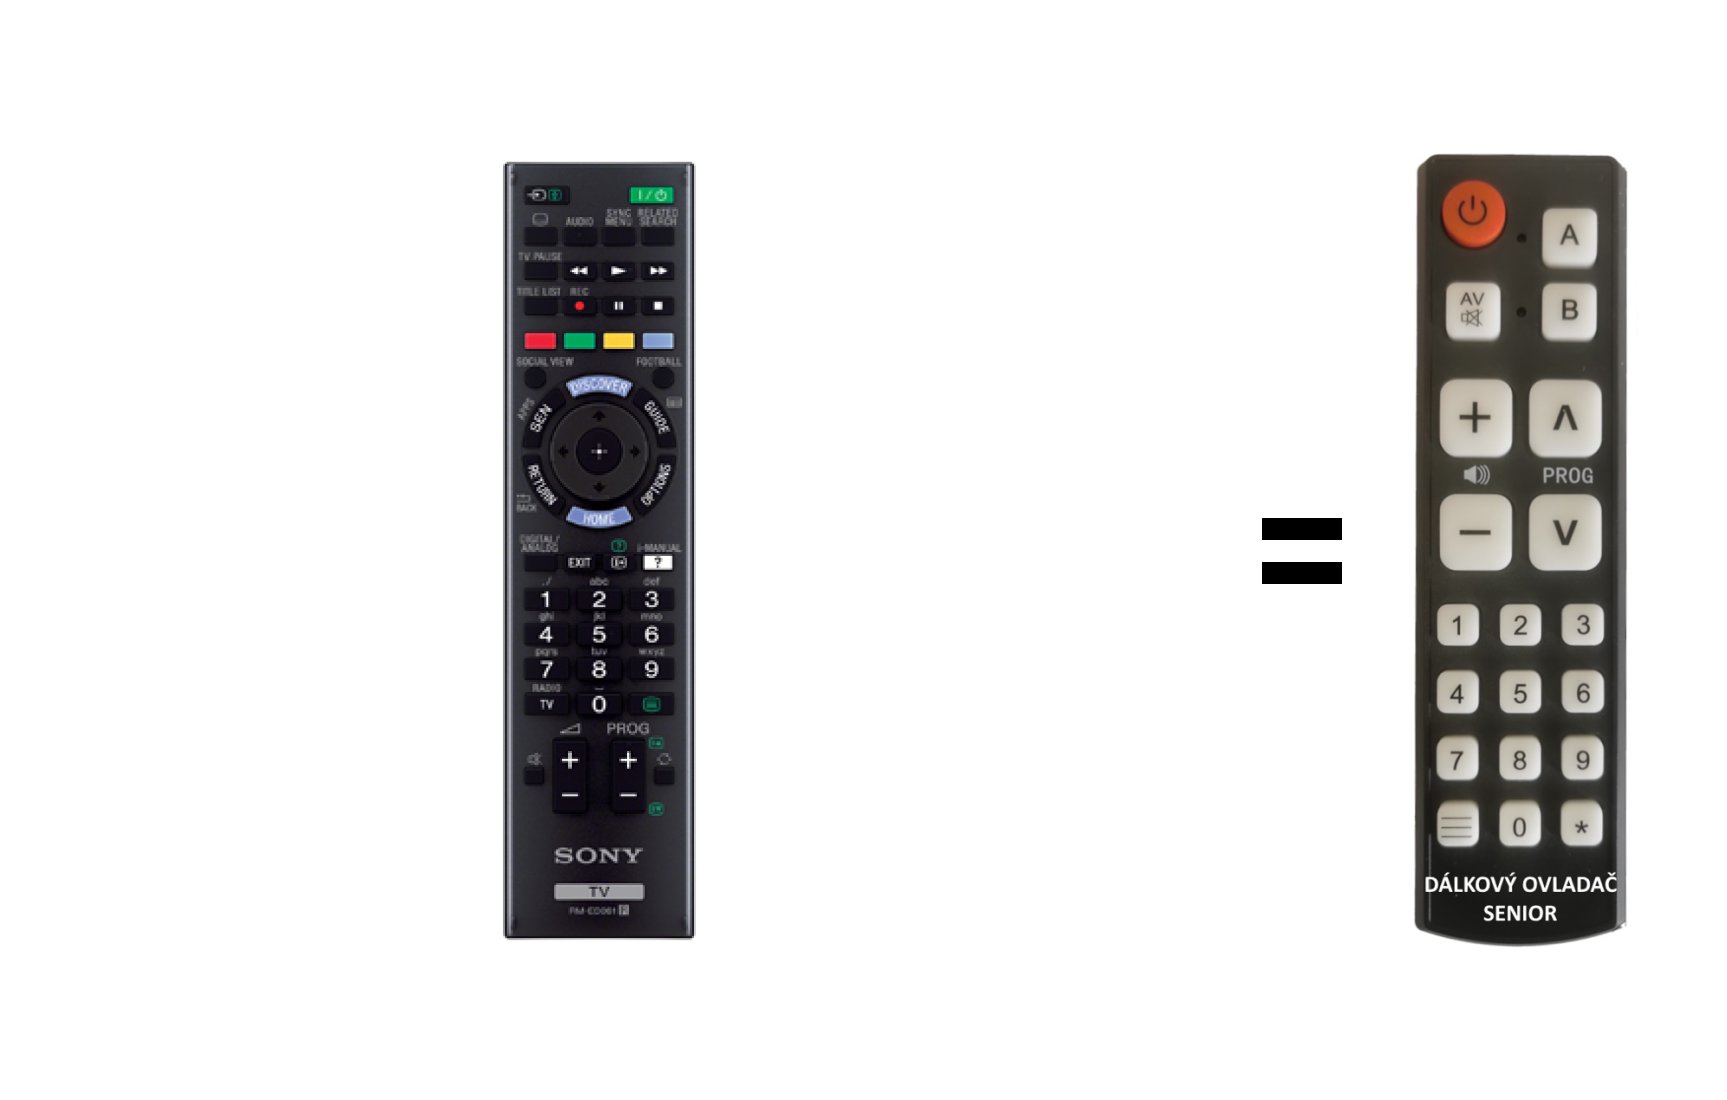 Sony kdl-48w605b replacement remote control for seniors